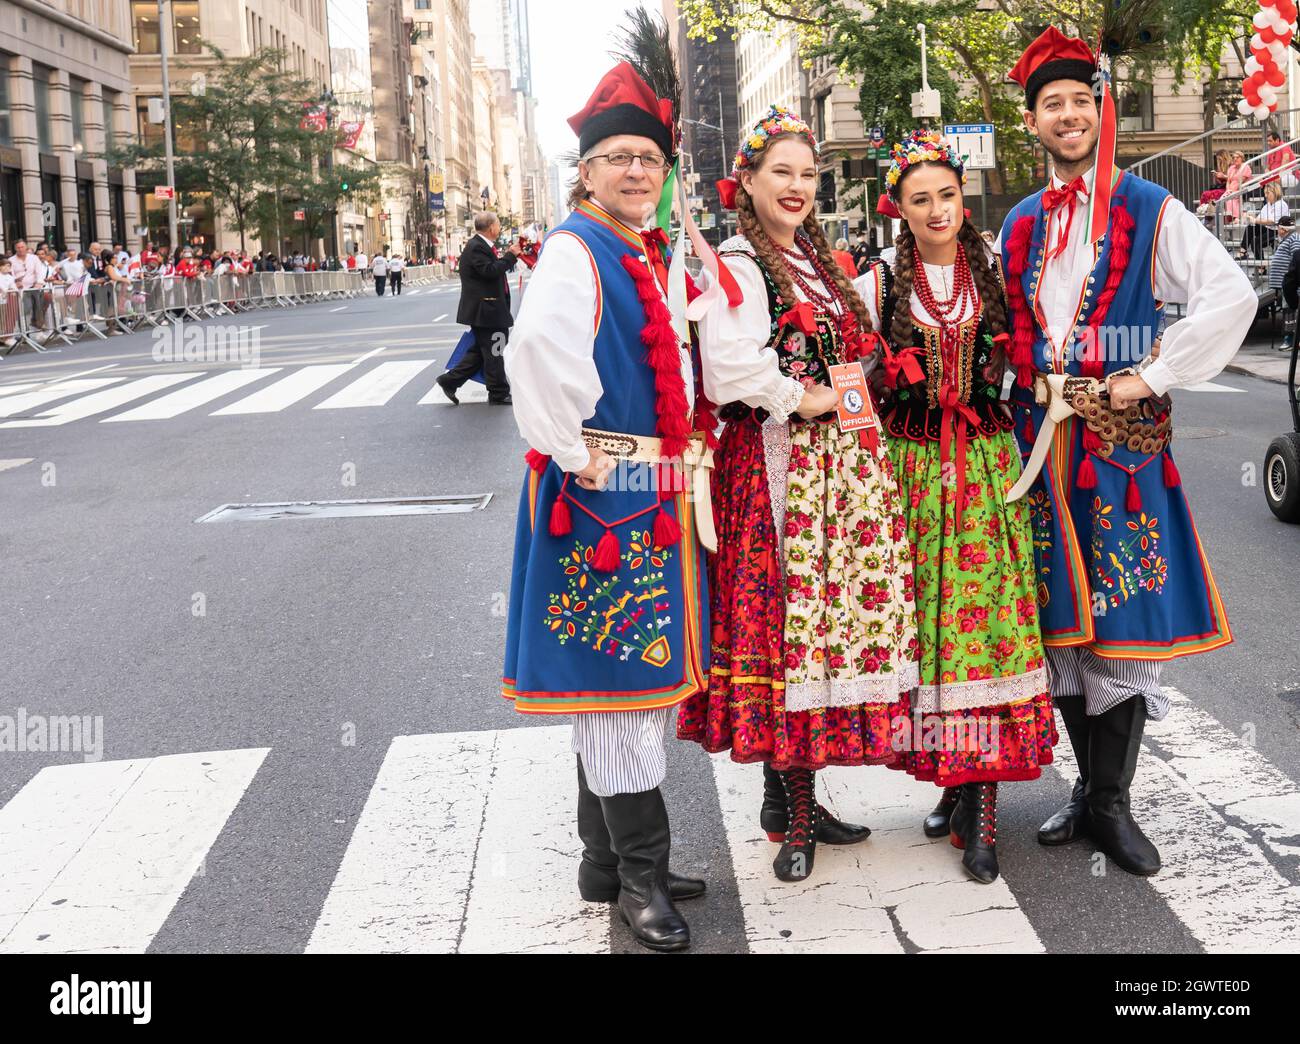 84th Annual Pulaski Day Parade in New York City - October 3, 2021 Stock Photo